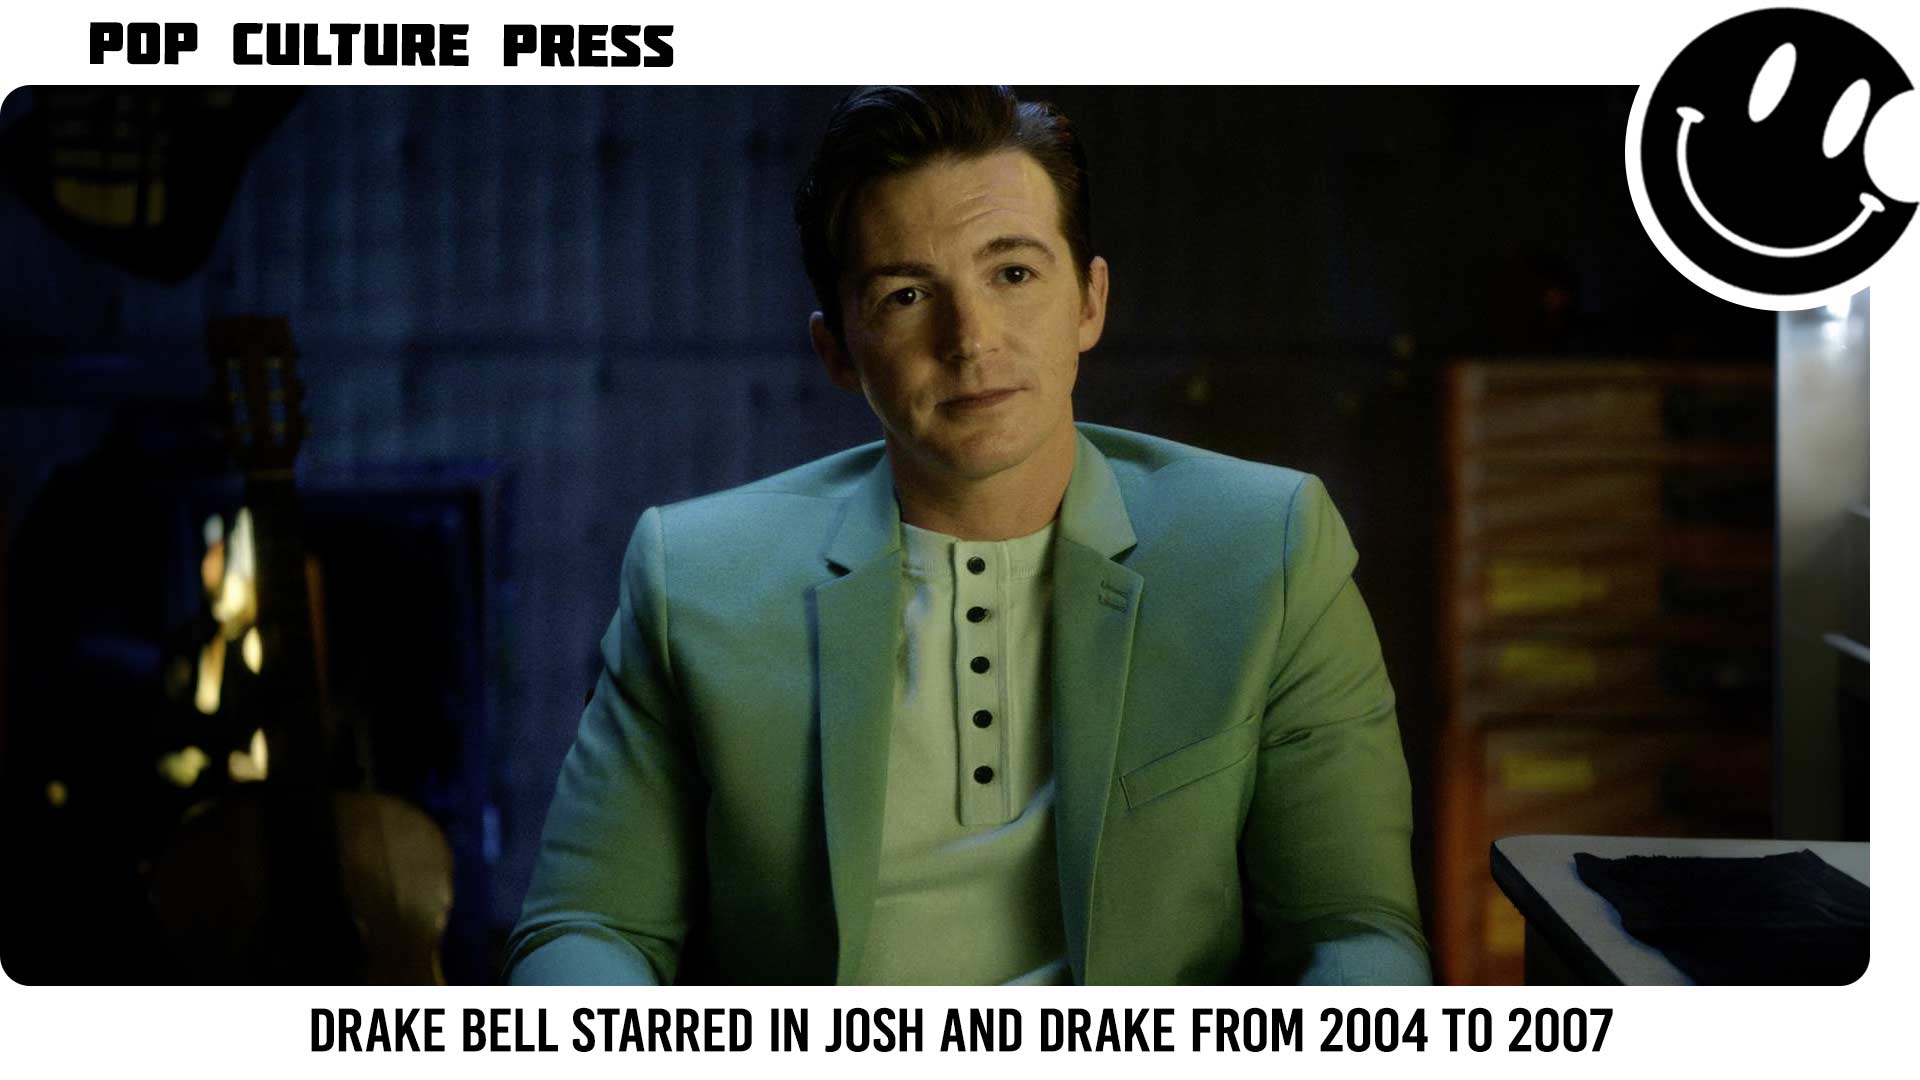 Drake Bell starred in Josh and Drake from 2004-2007